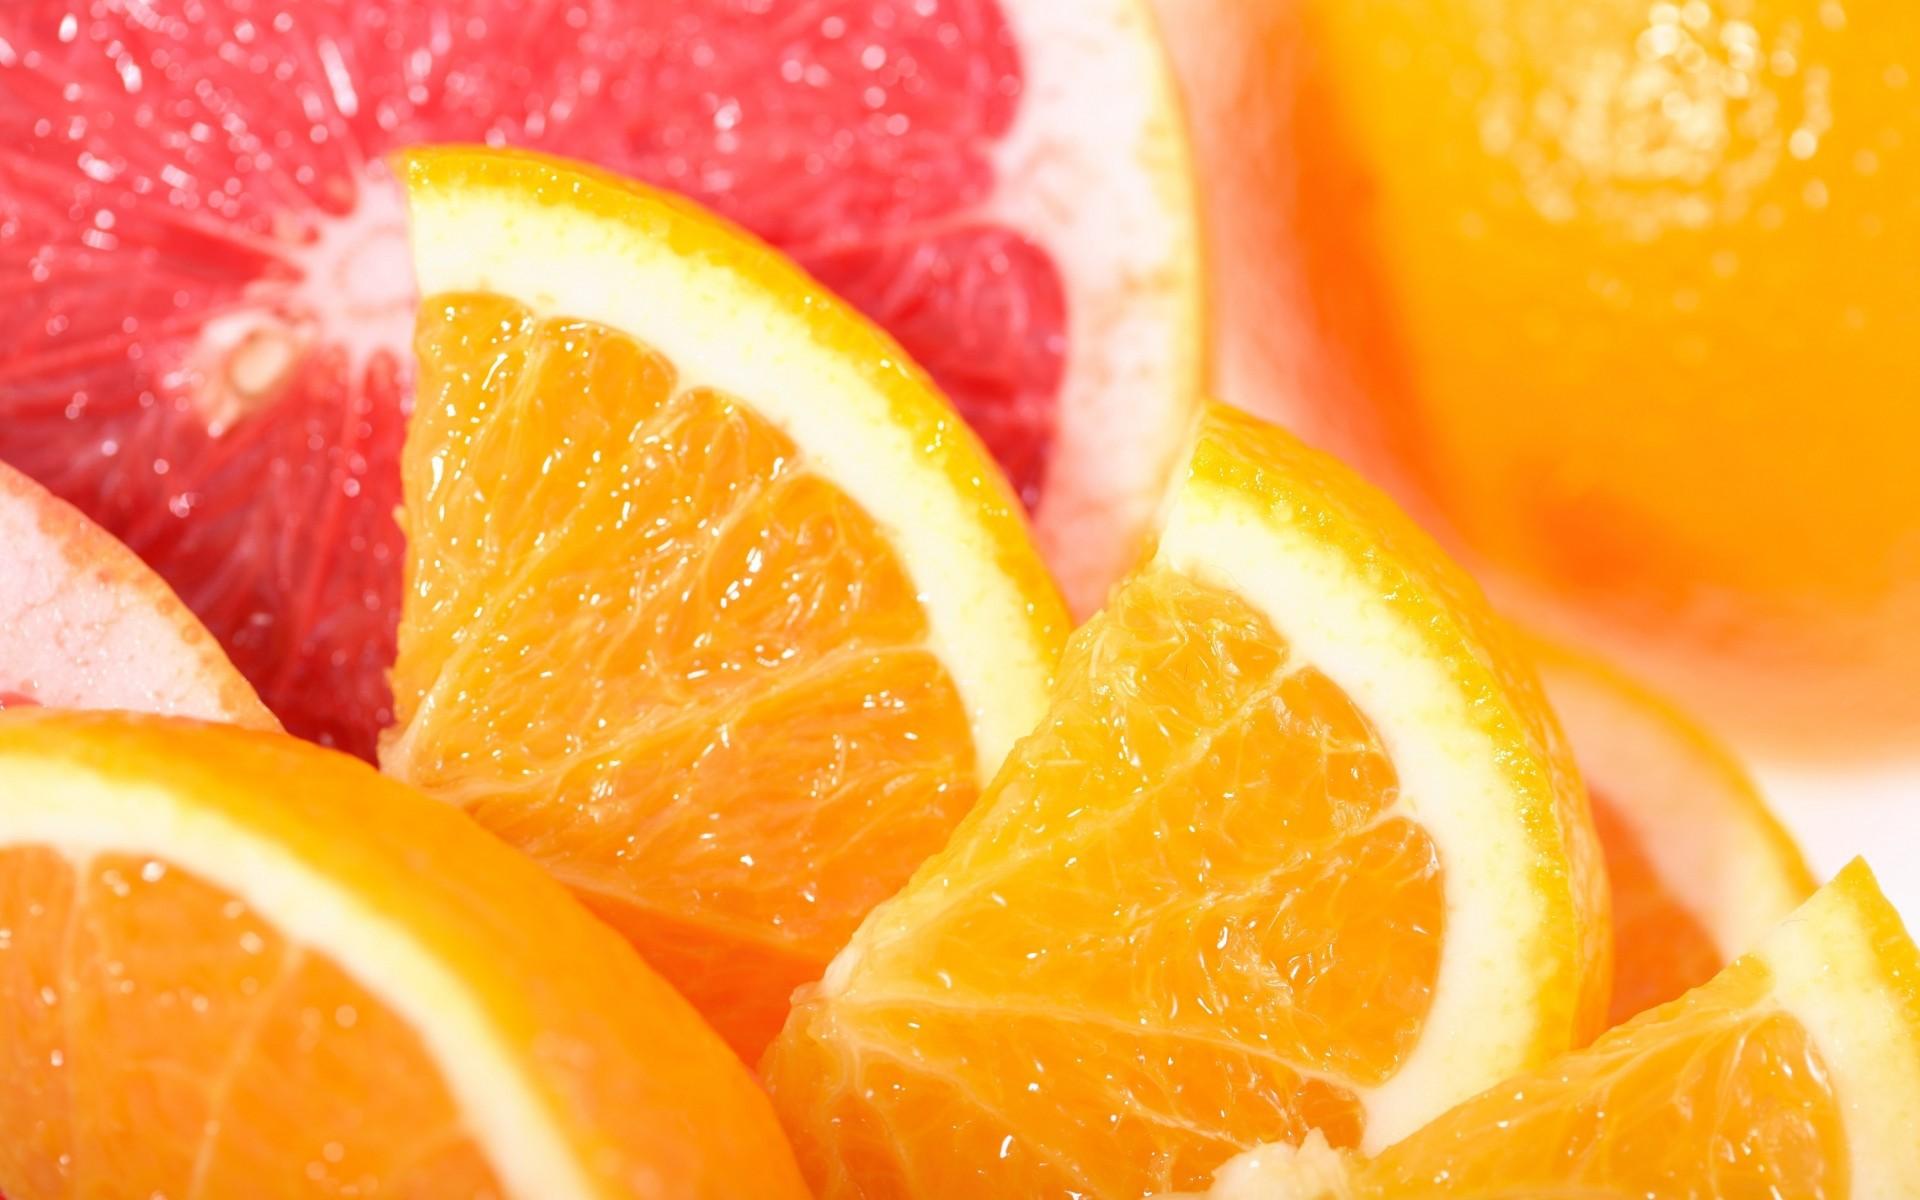 Slices of orange and grapefruit wallpaper and image